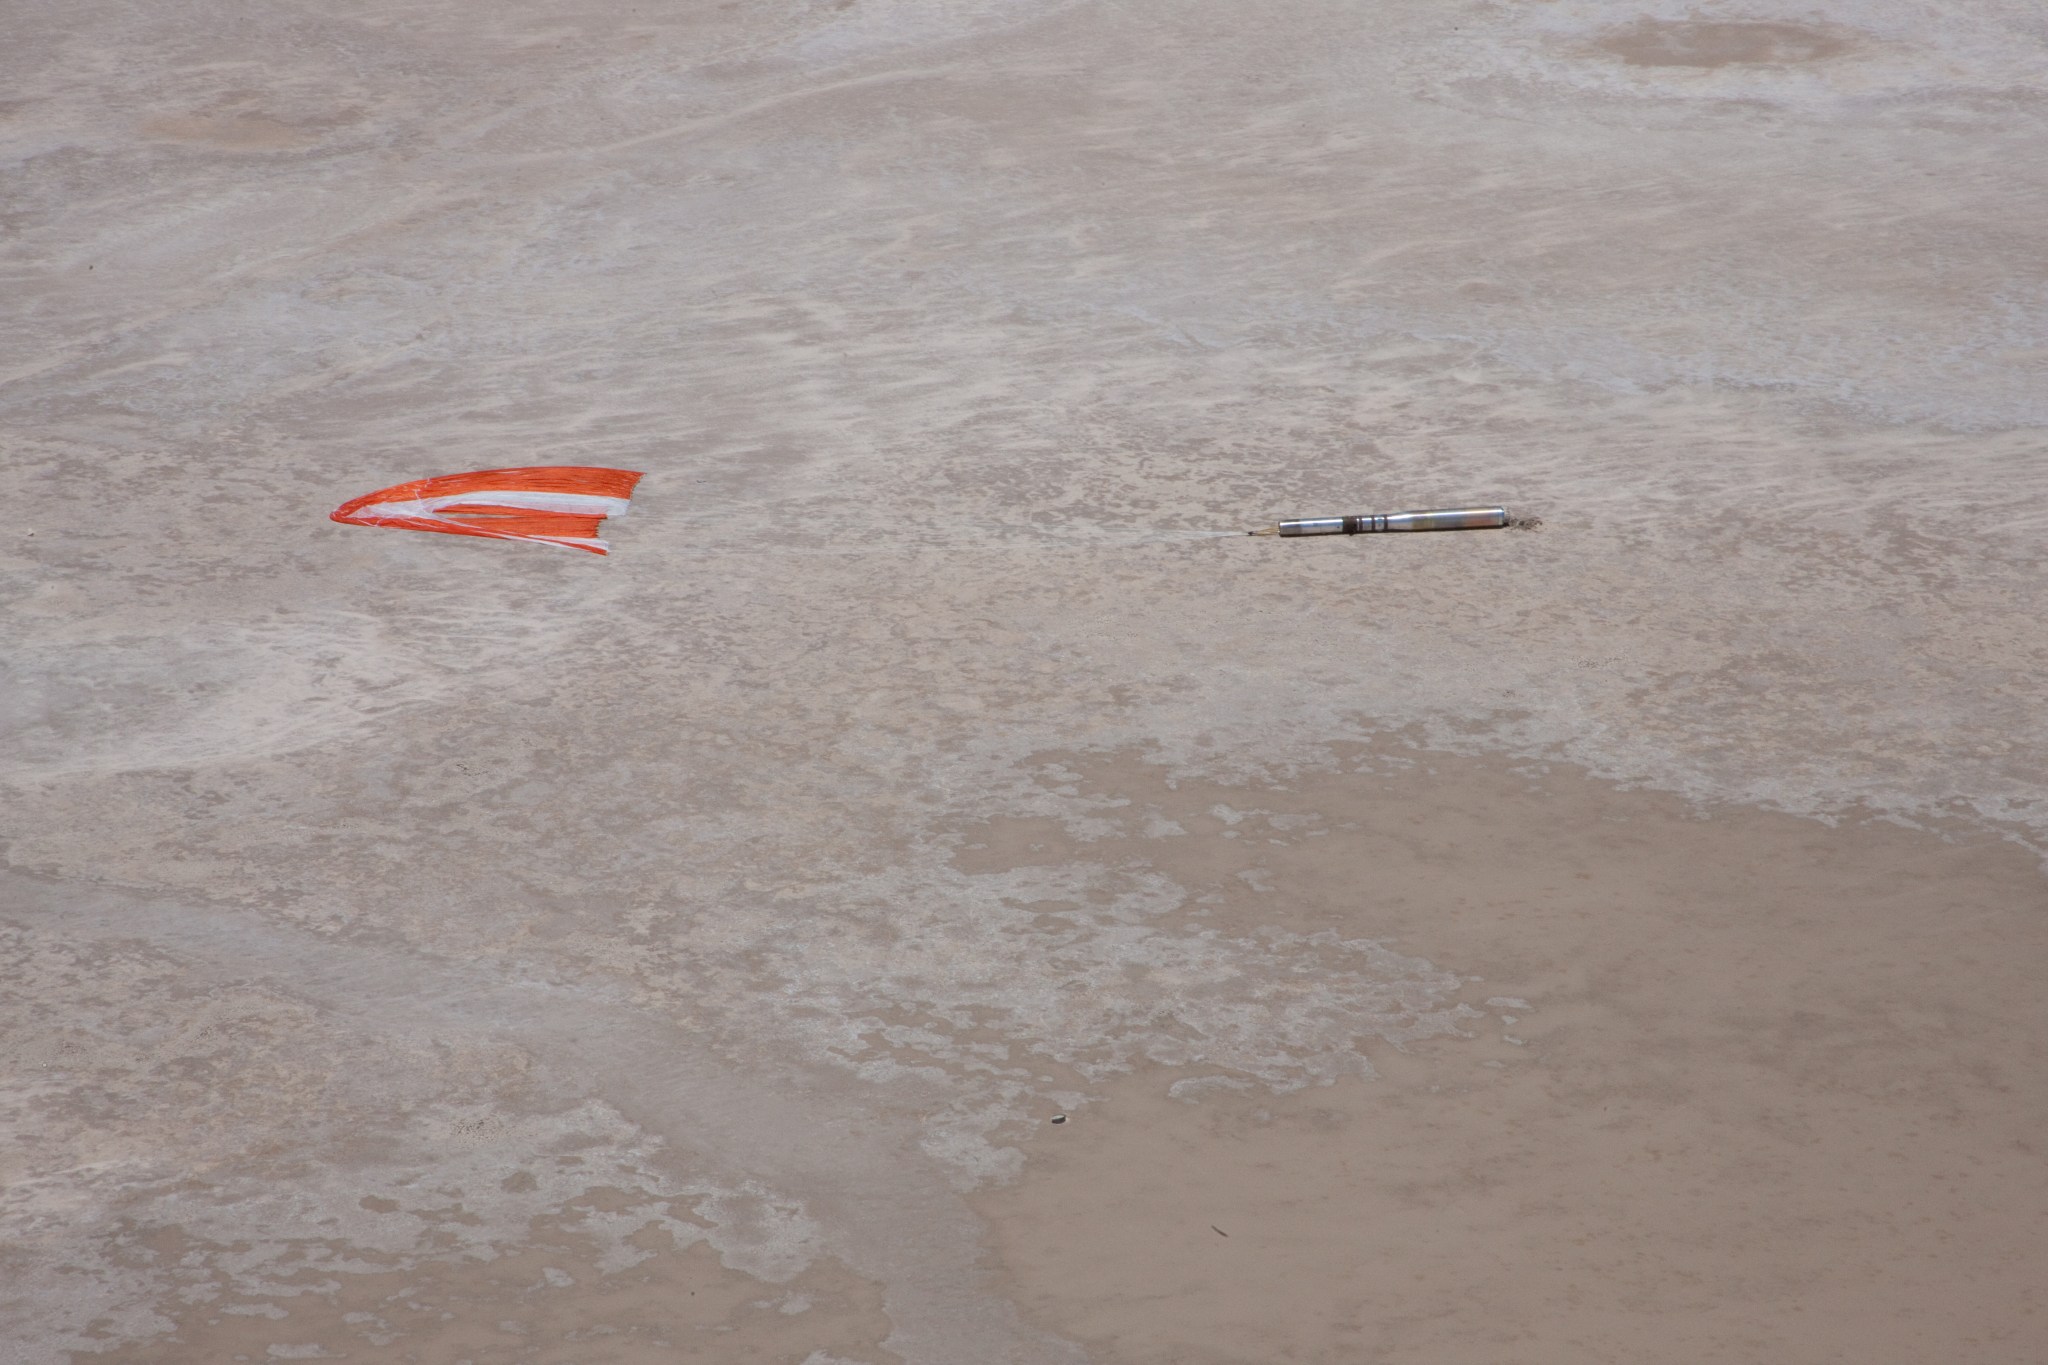 The Hi C payload and the subsystems rest on the desert after parachuting back to Earth.